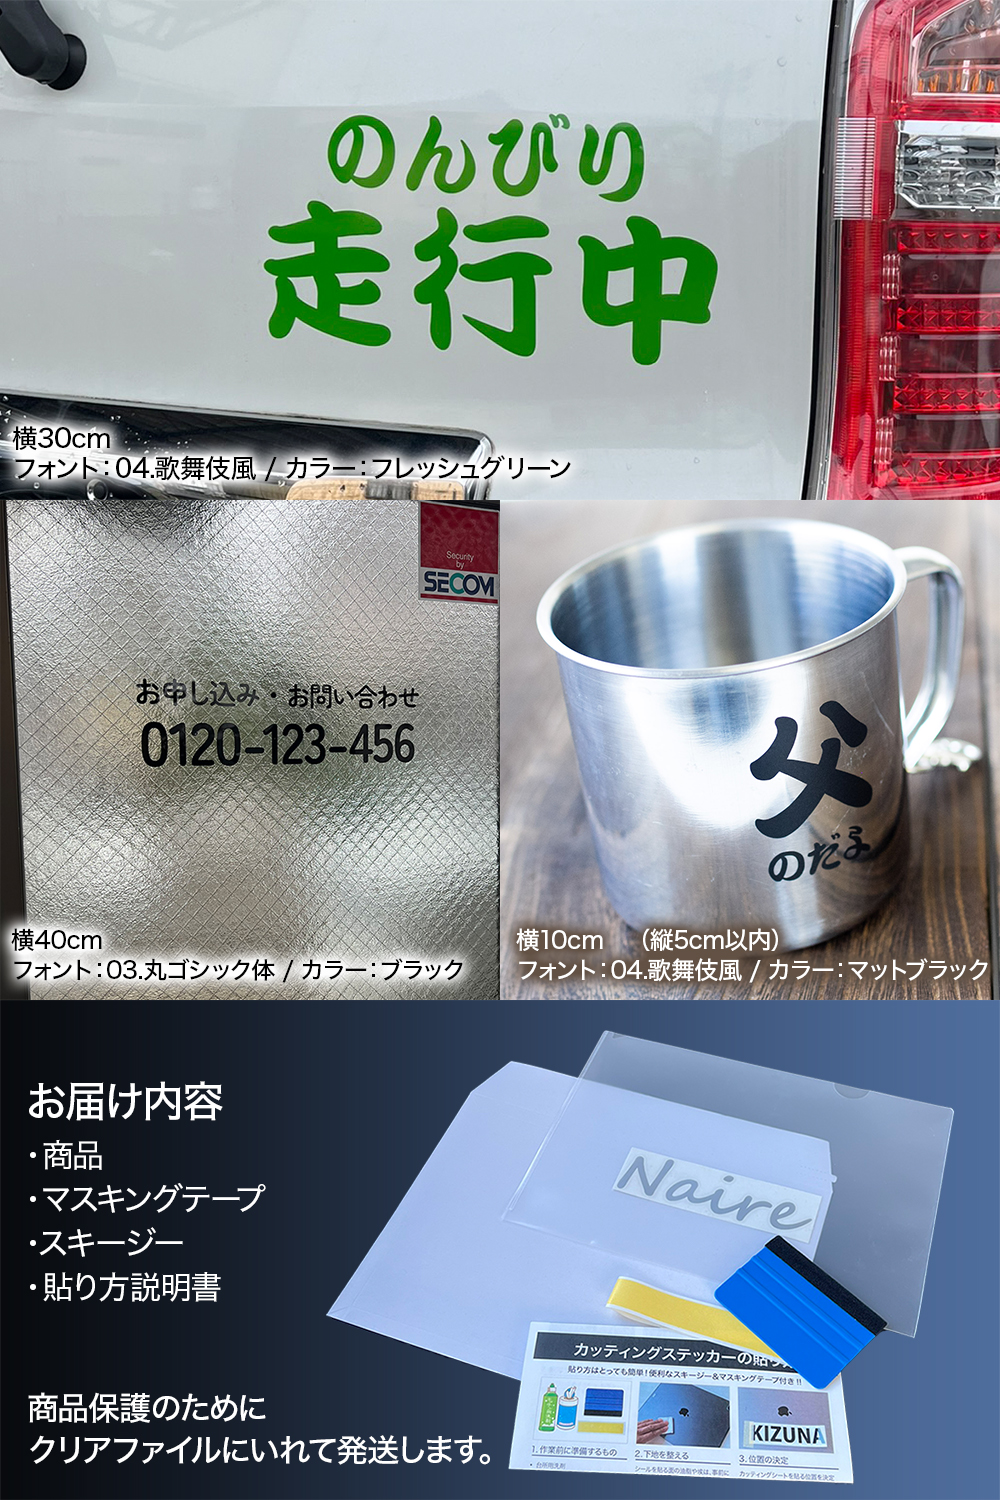 2 line type cutting sticker ski ji- attaching character only . remainder . cut character sticker making order width 10cm from 60cm till car signboard store name nameplate outdoors 